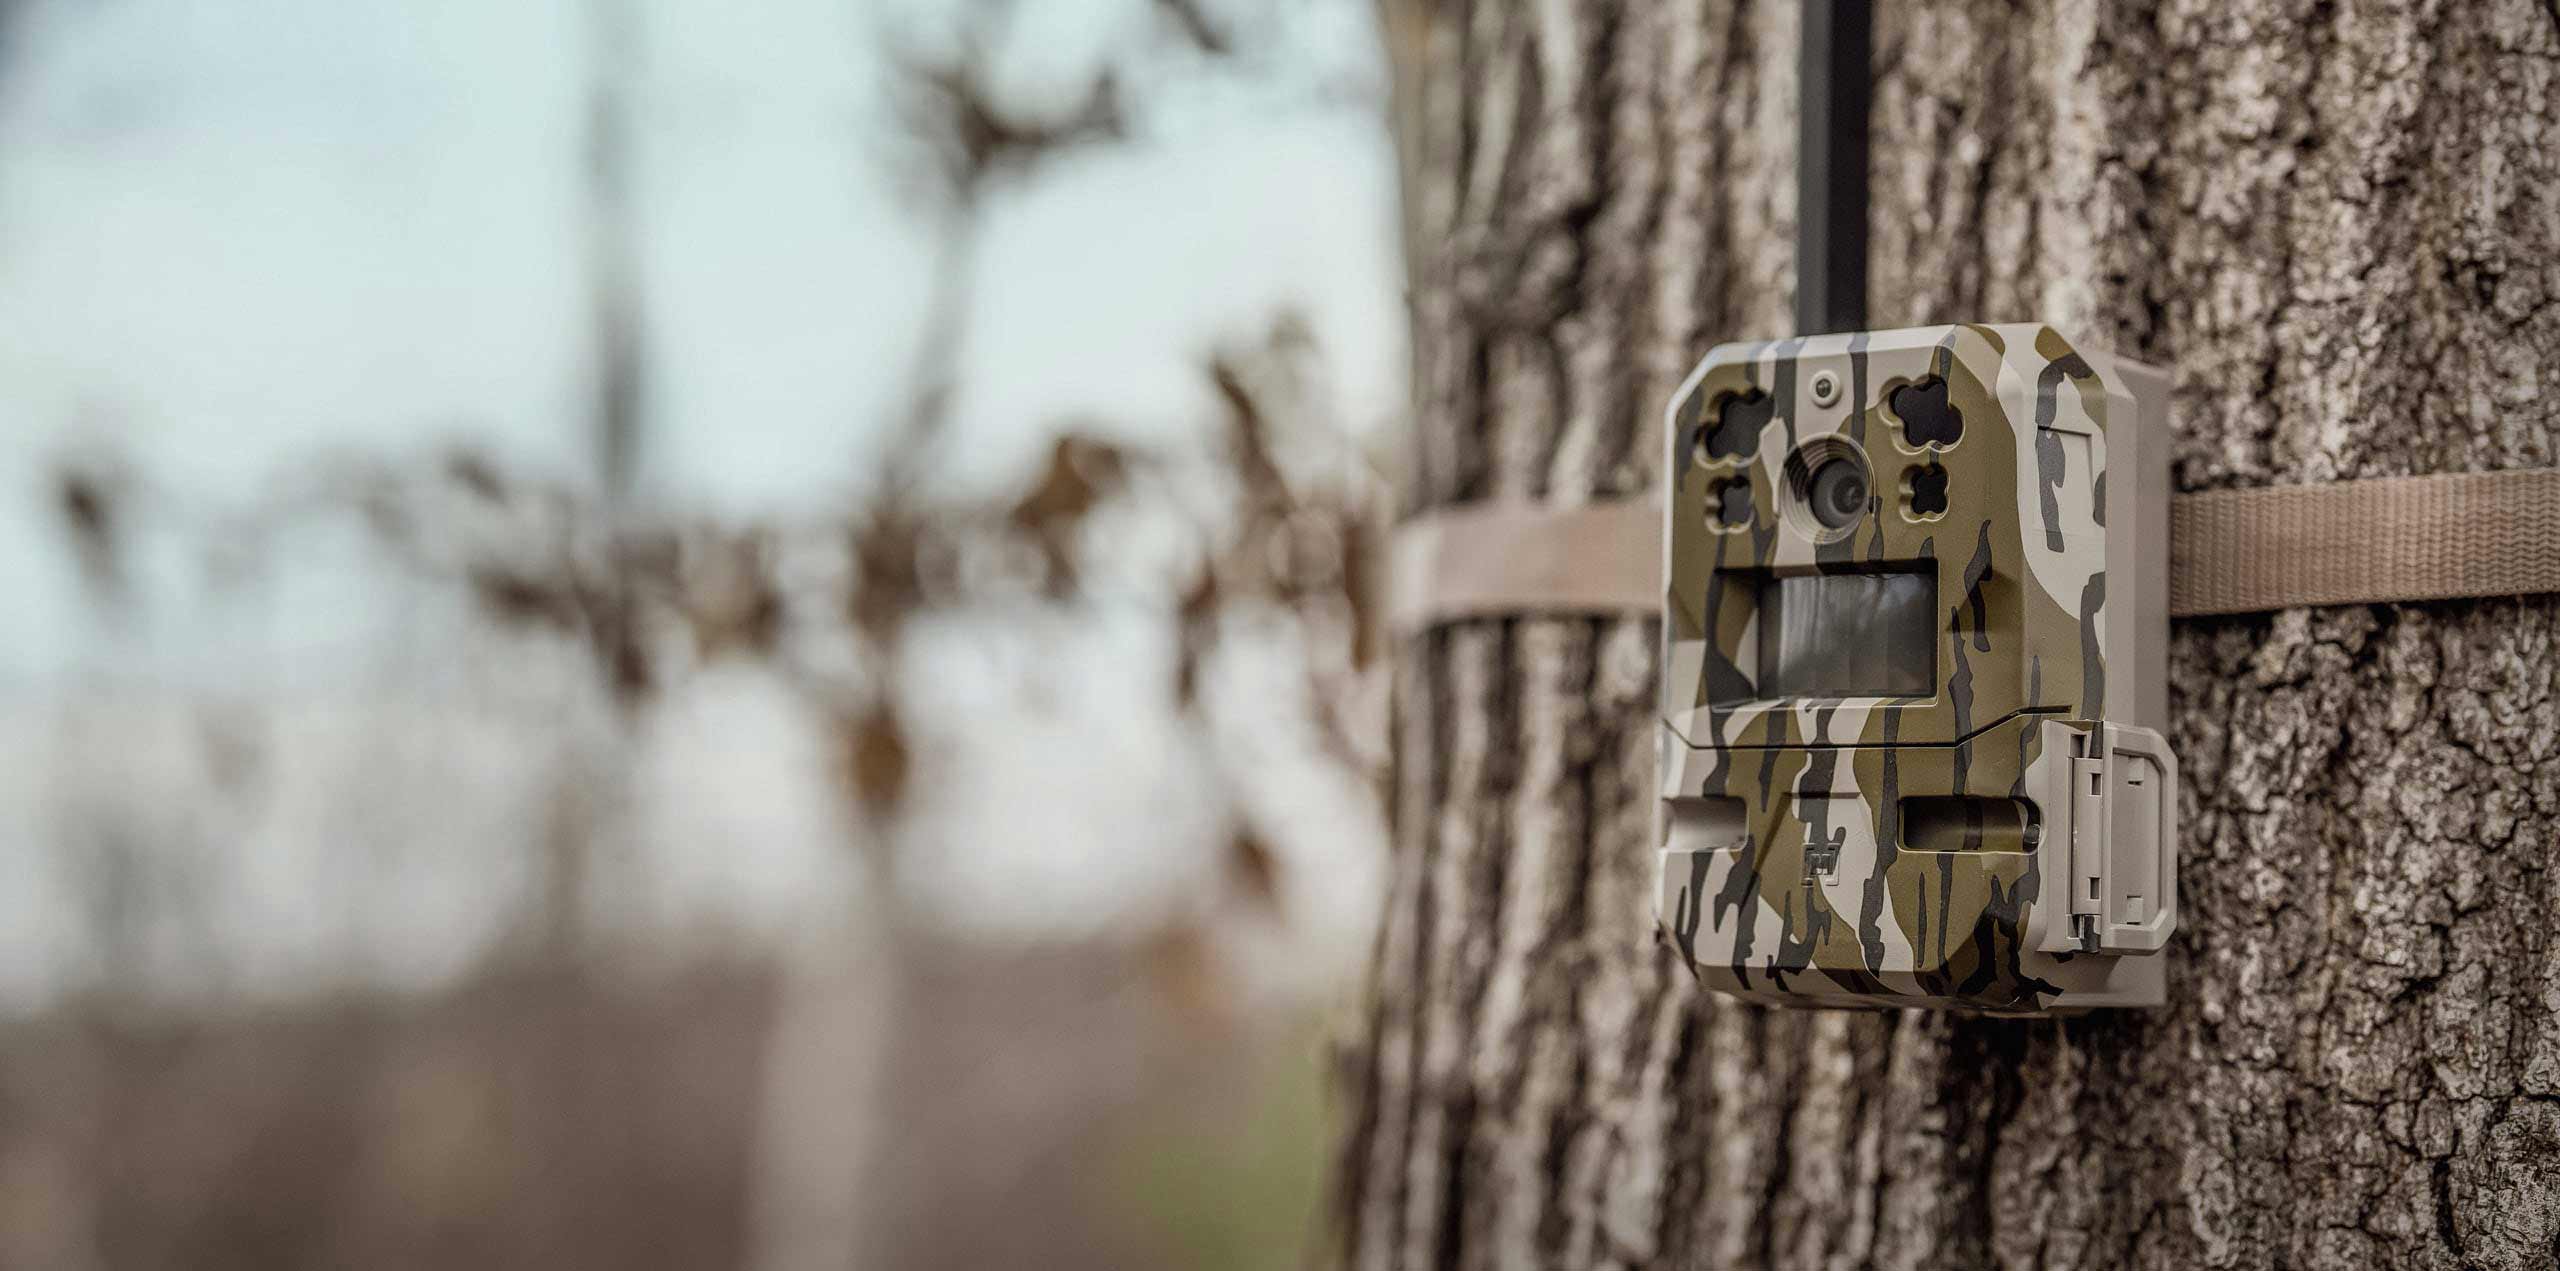 Moultrie Mobile Edge Pro camera strapped to tree.